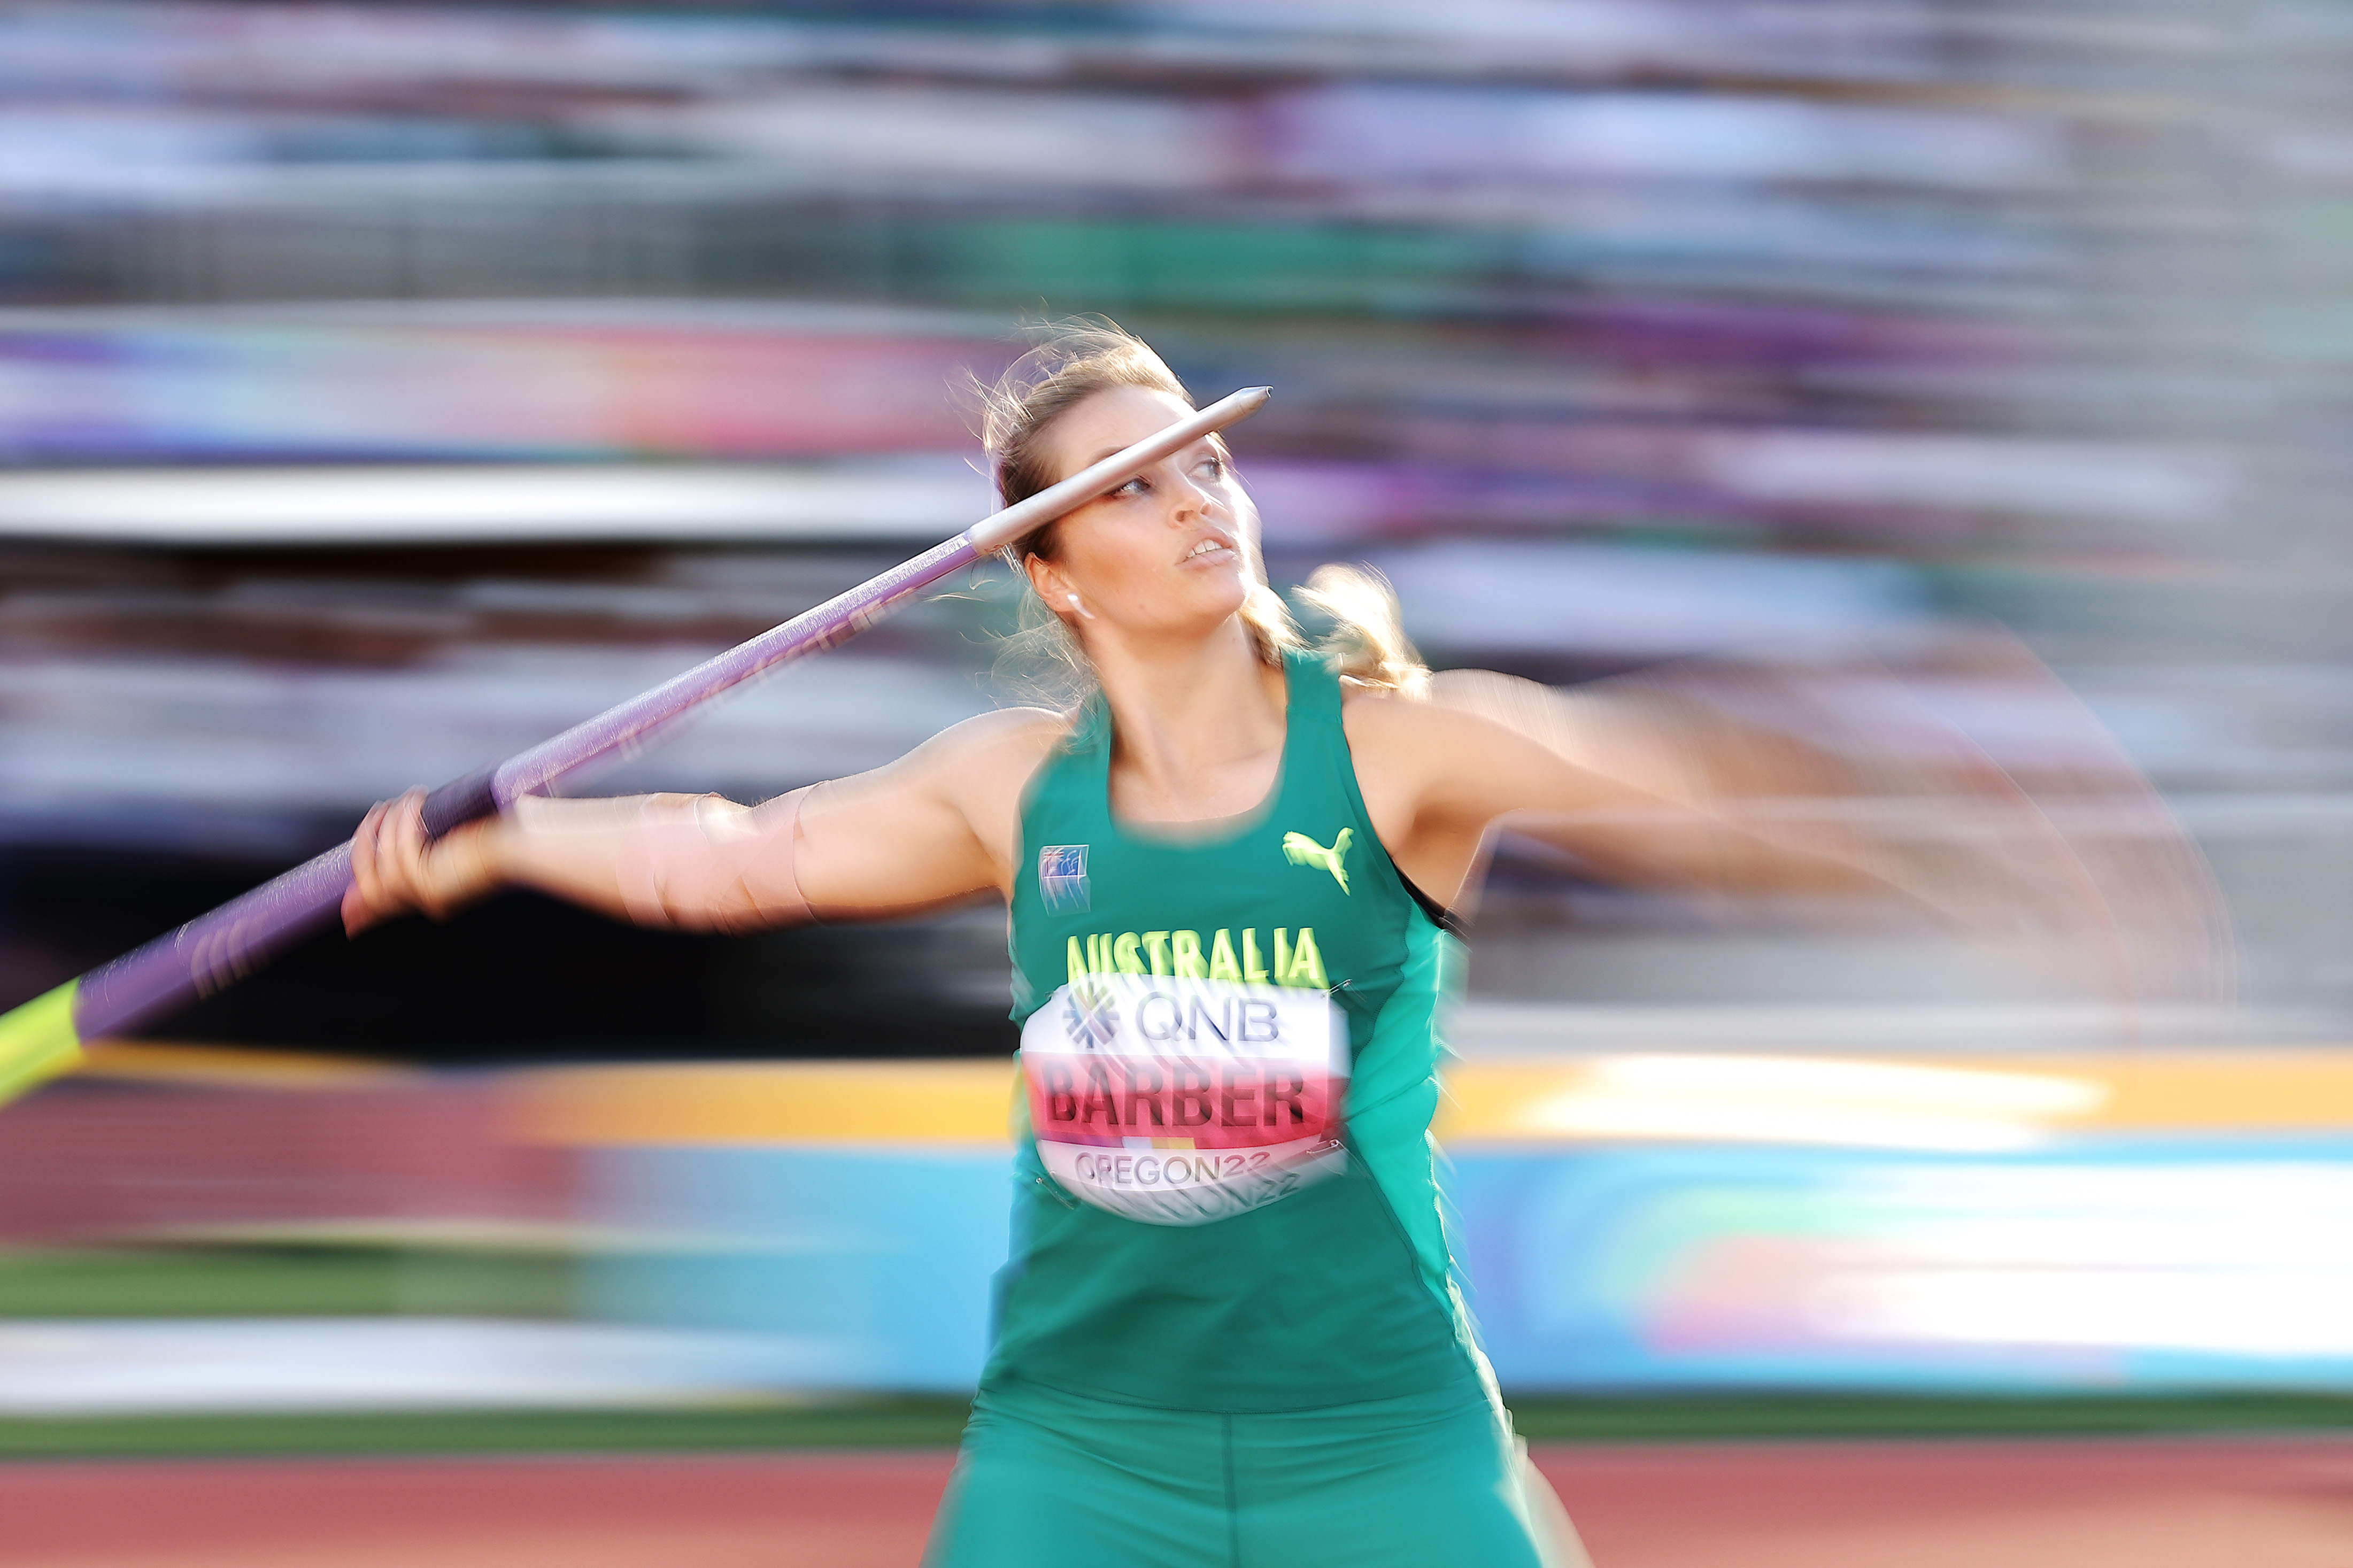 Kelsey Lee Barber about to throw javelin with background blurred.